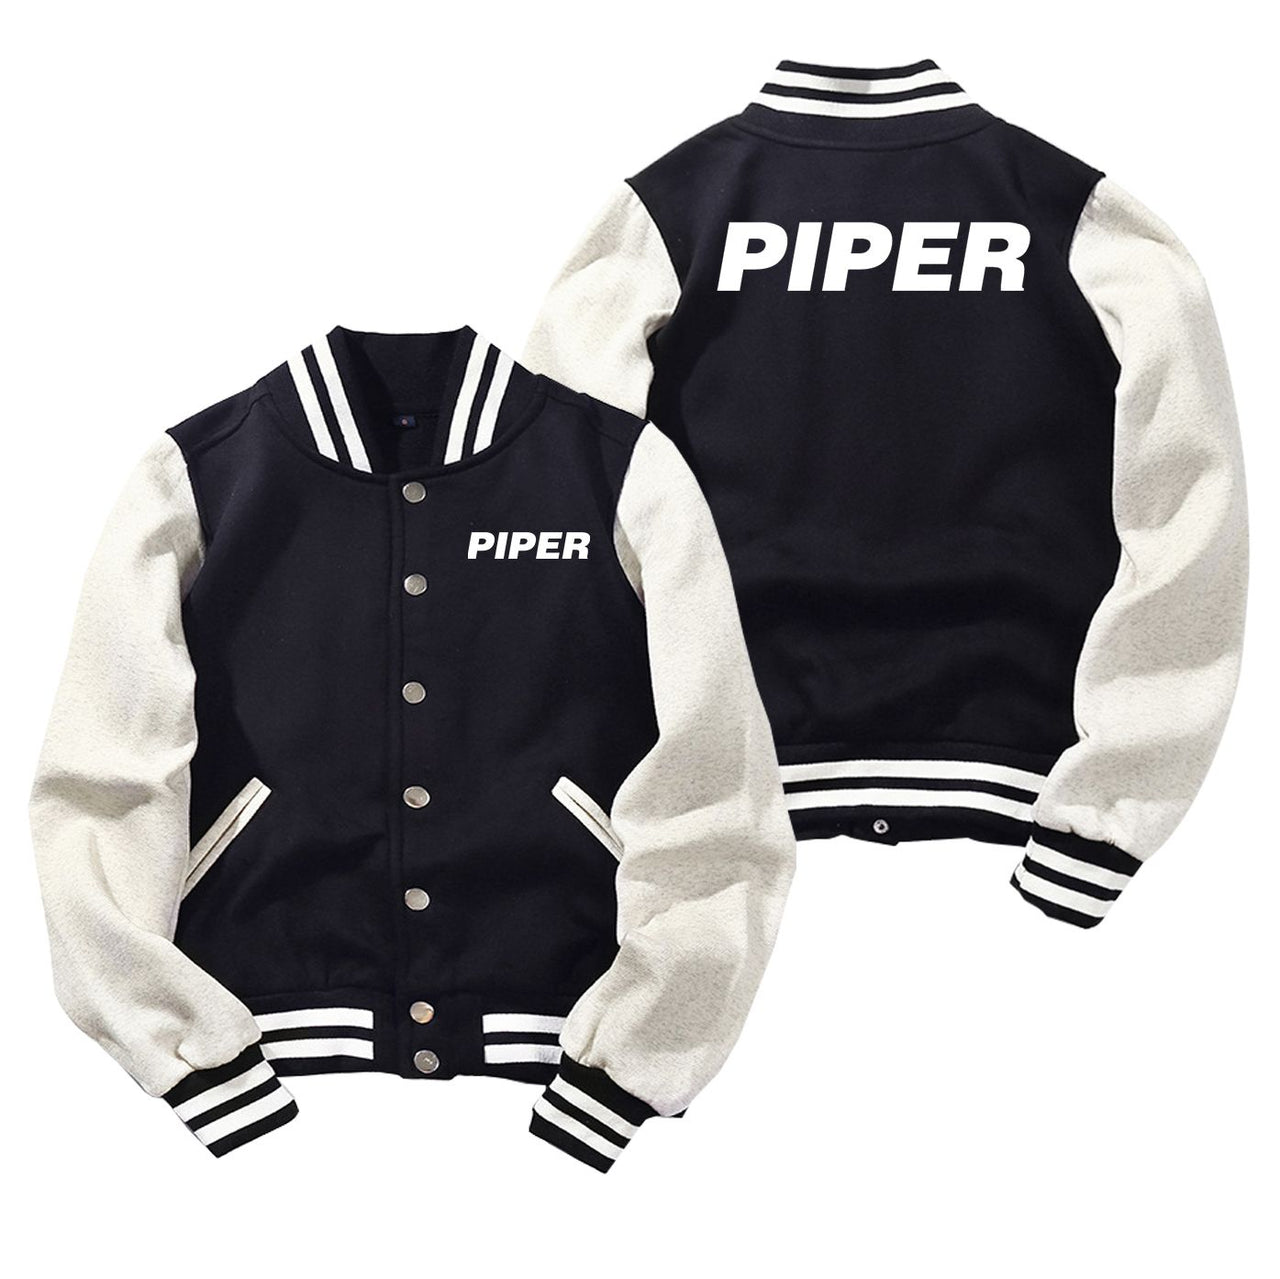 Piper & Text Designed Baseball Style Jackets